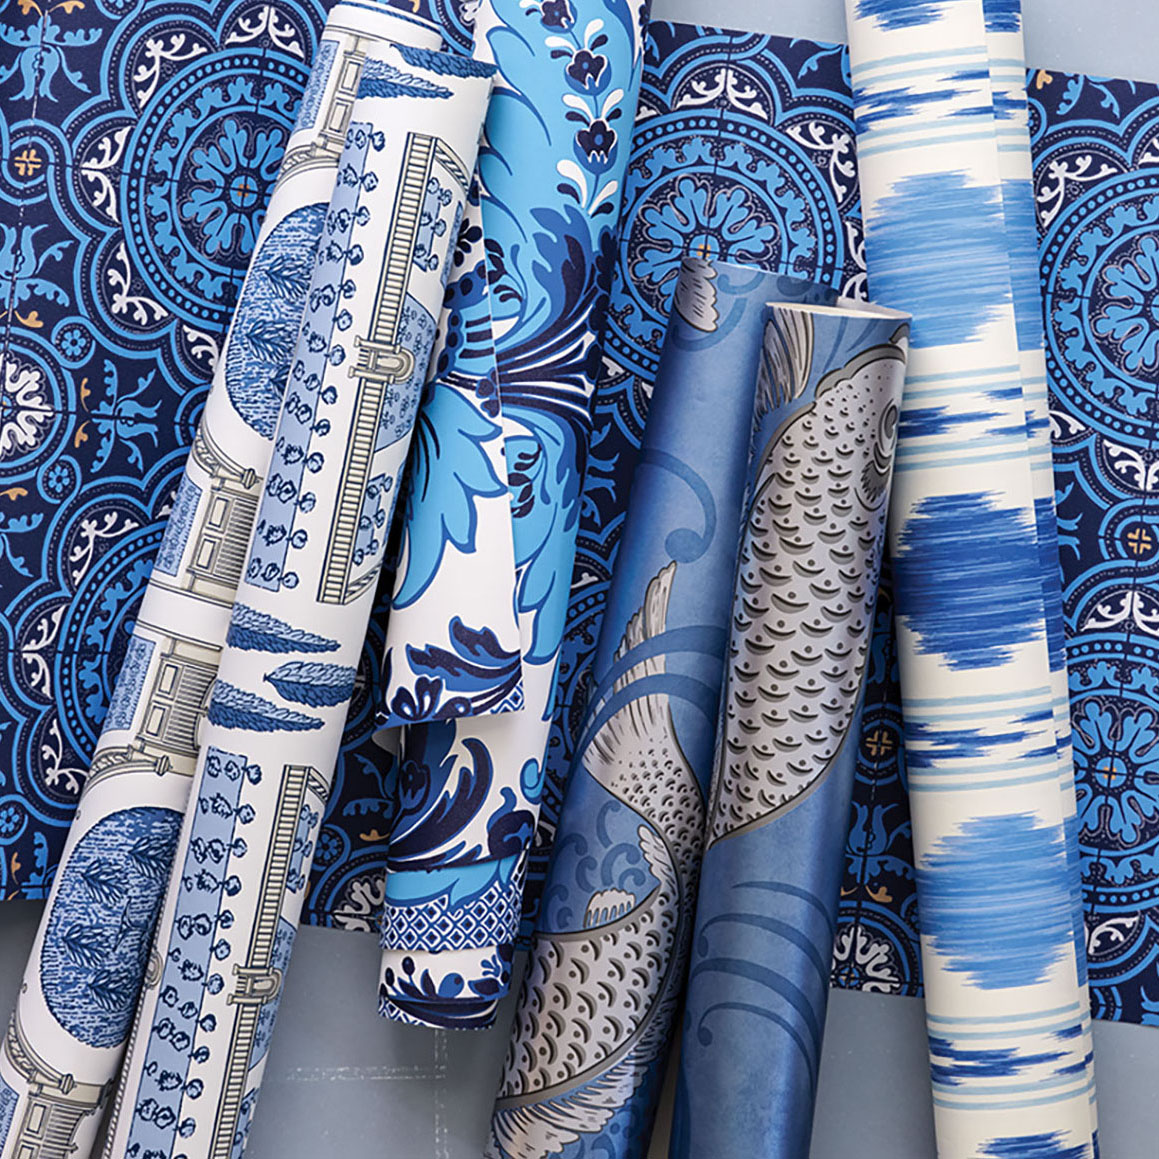 6 rolls of blue and white wallpaper in various patterns